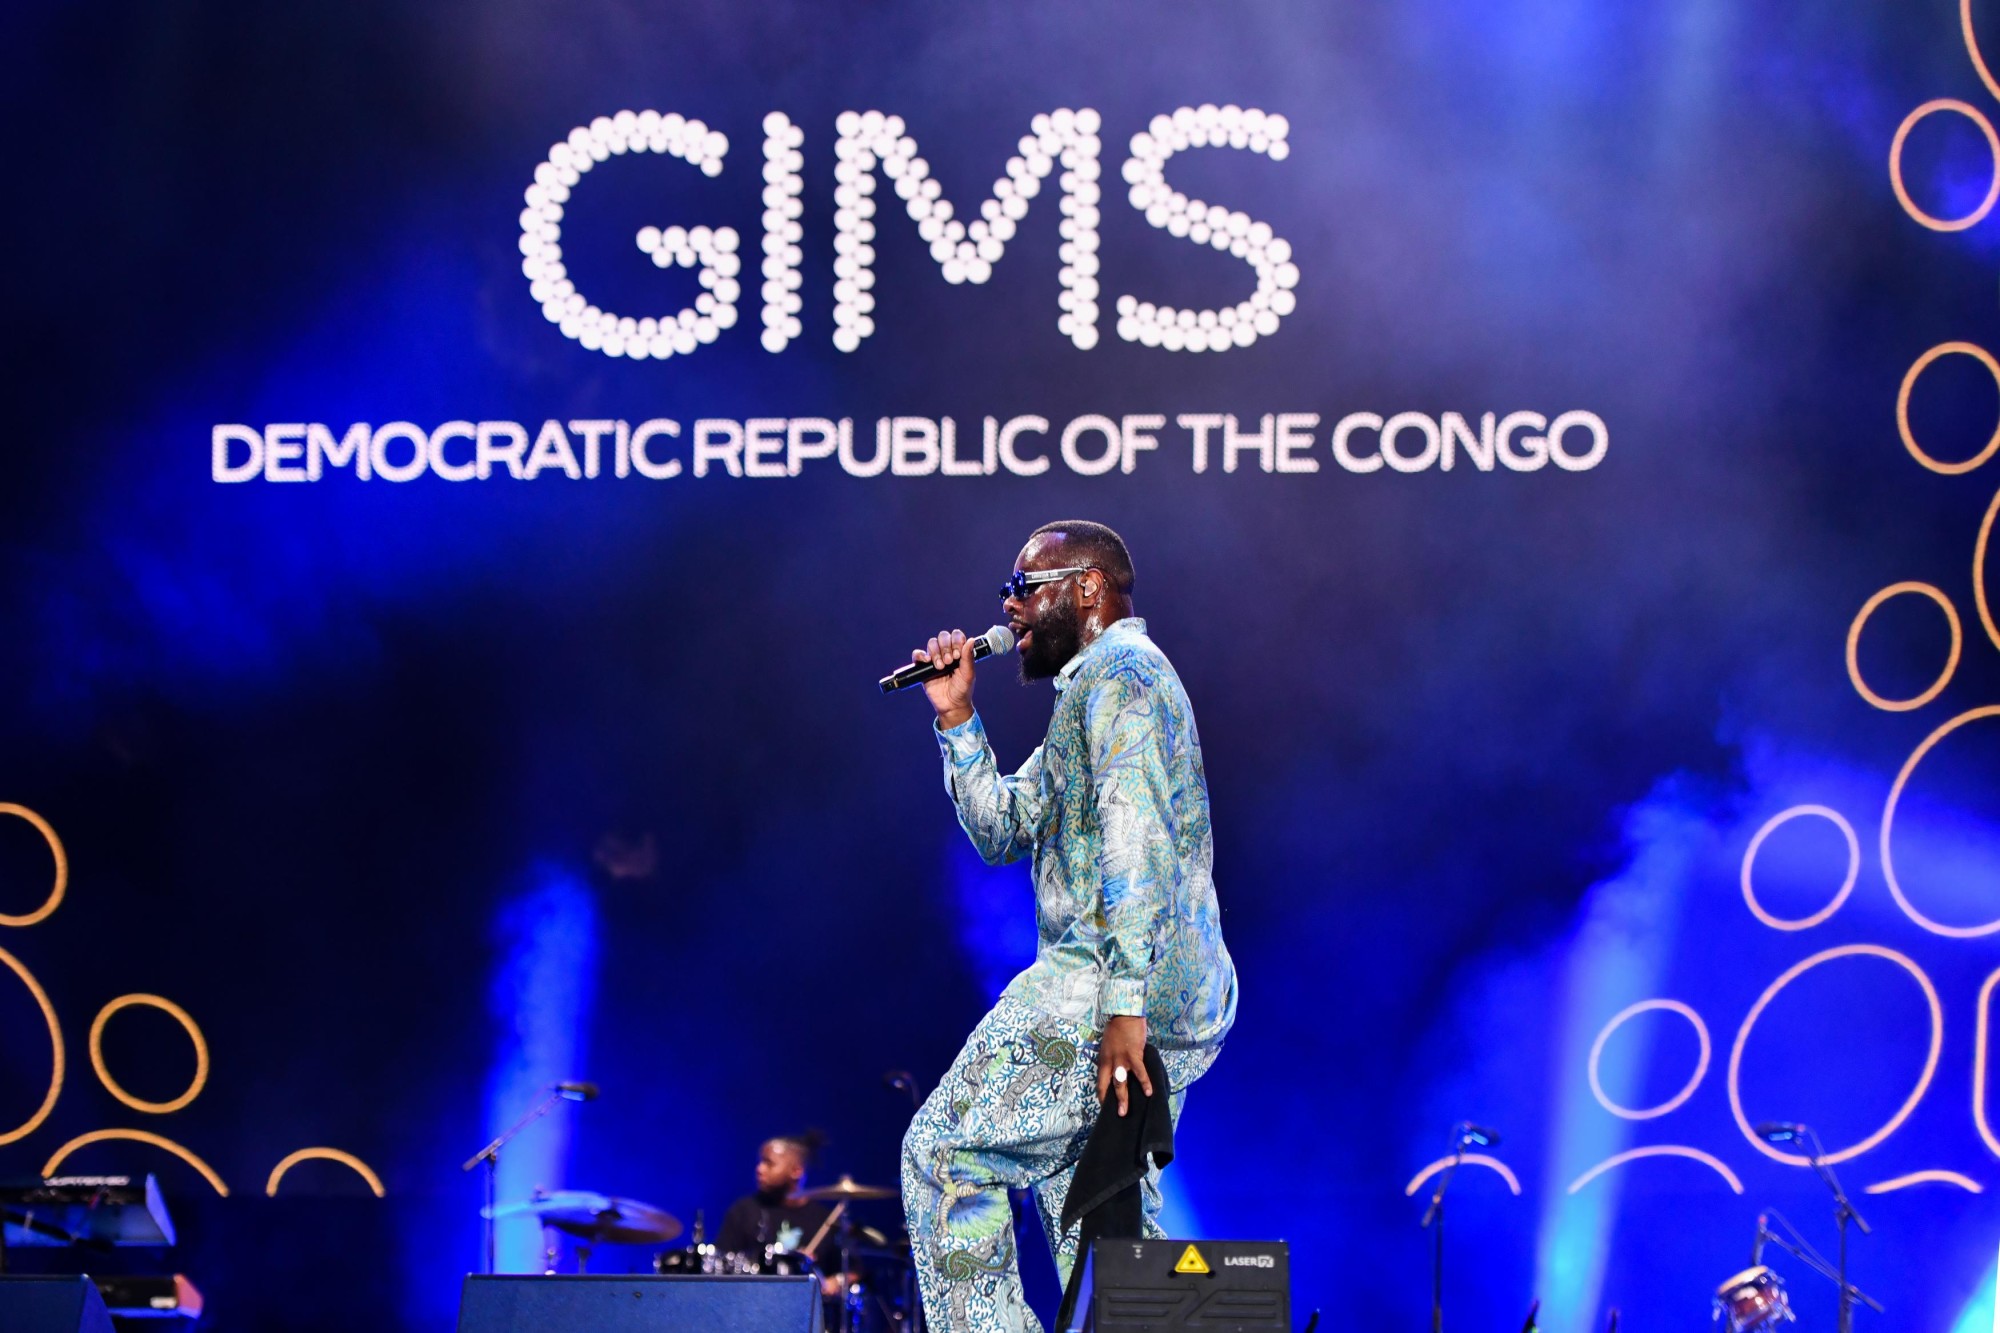 Gims performs during The Night of the Democratic Republic of Congo at Jubilee Stage m67601